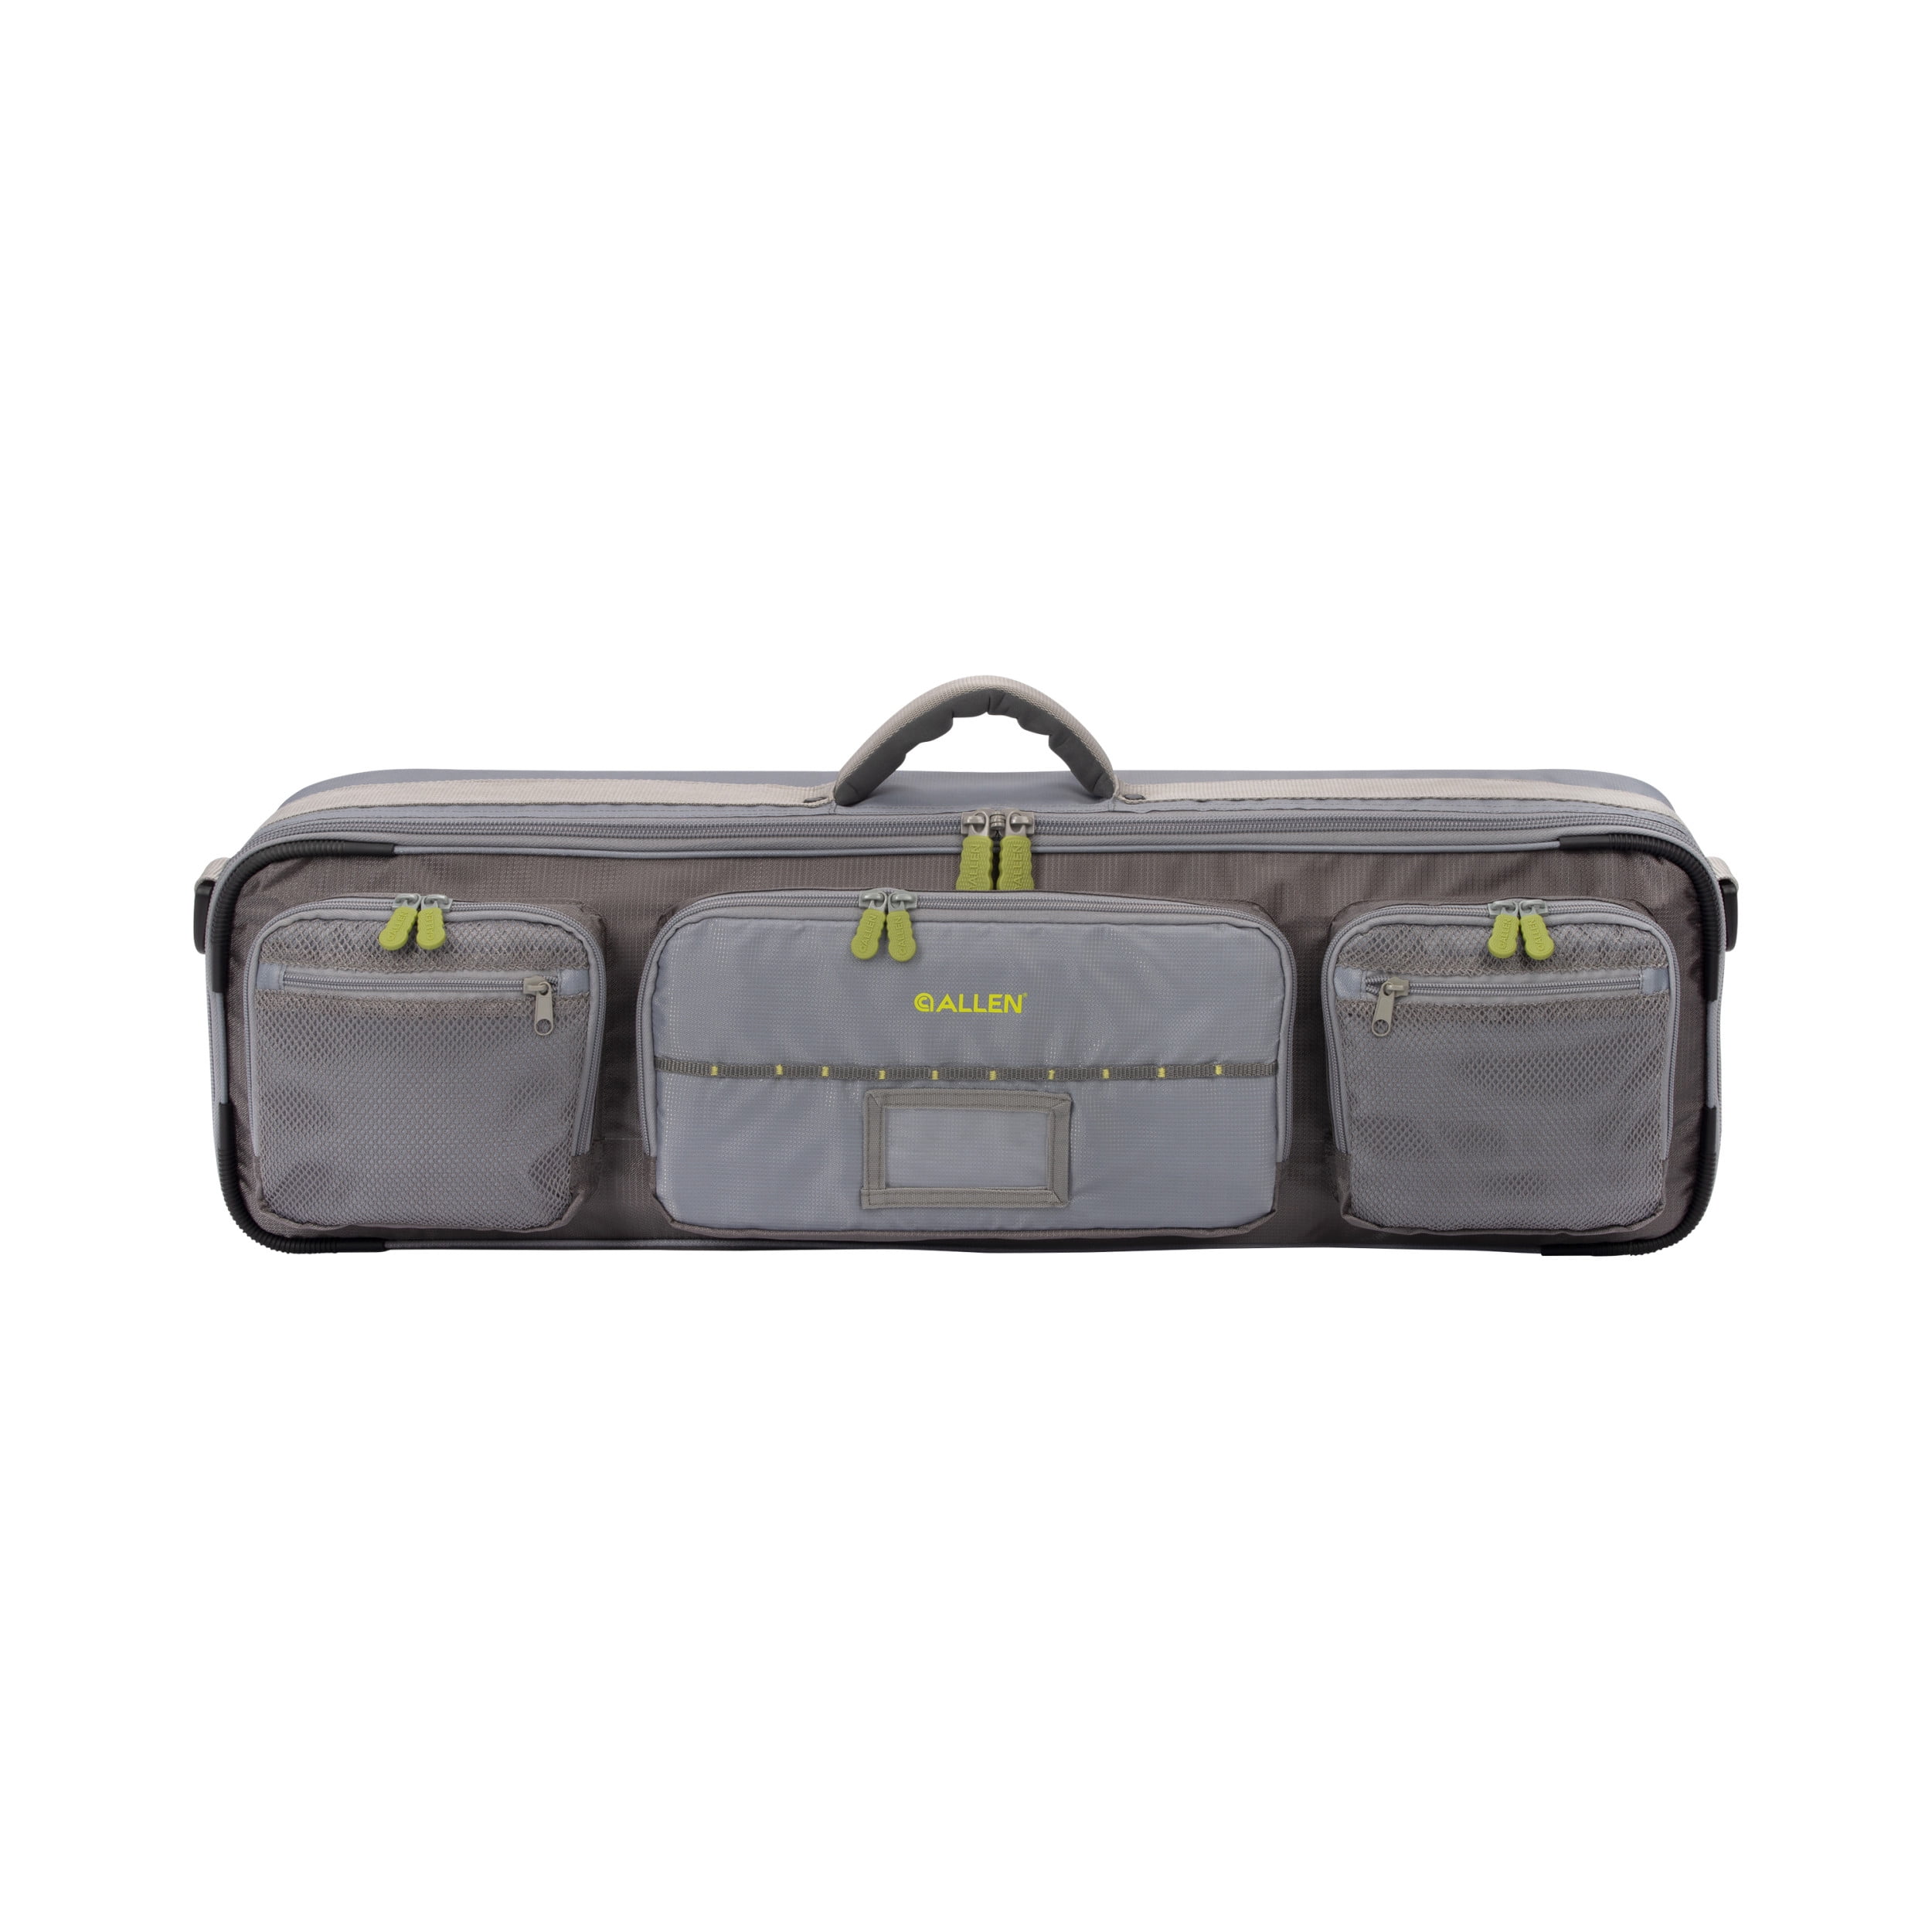 Allen Company Cottonwood Fly Fishing Rod And Gear Bag Case